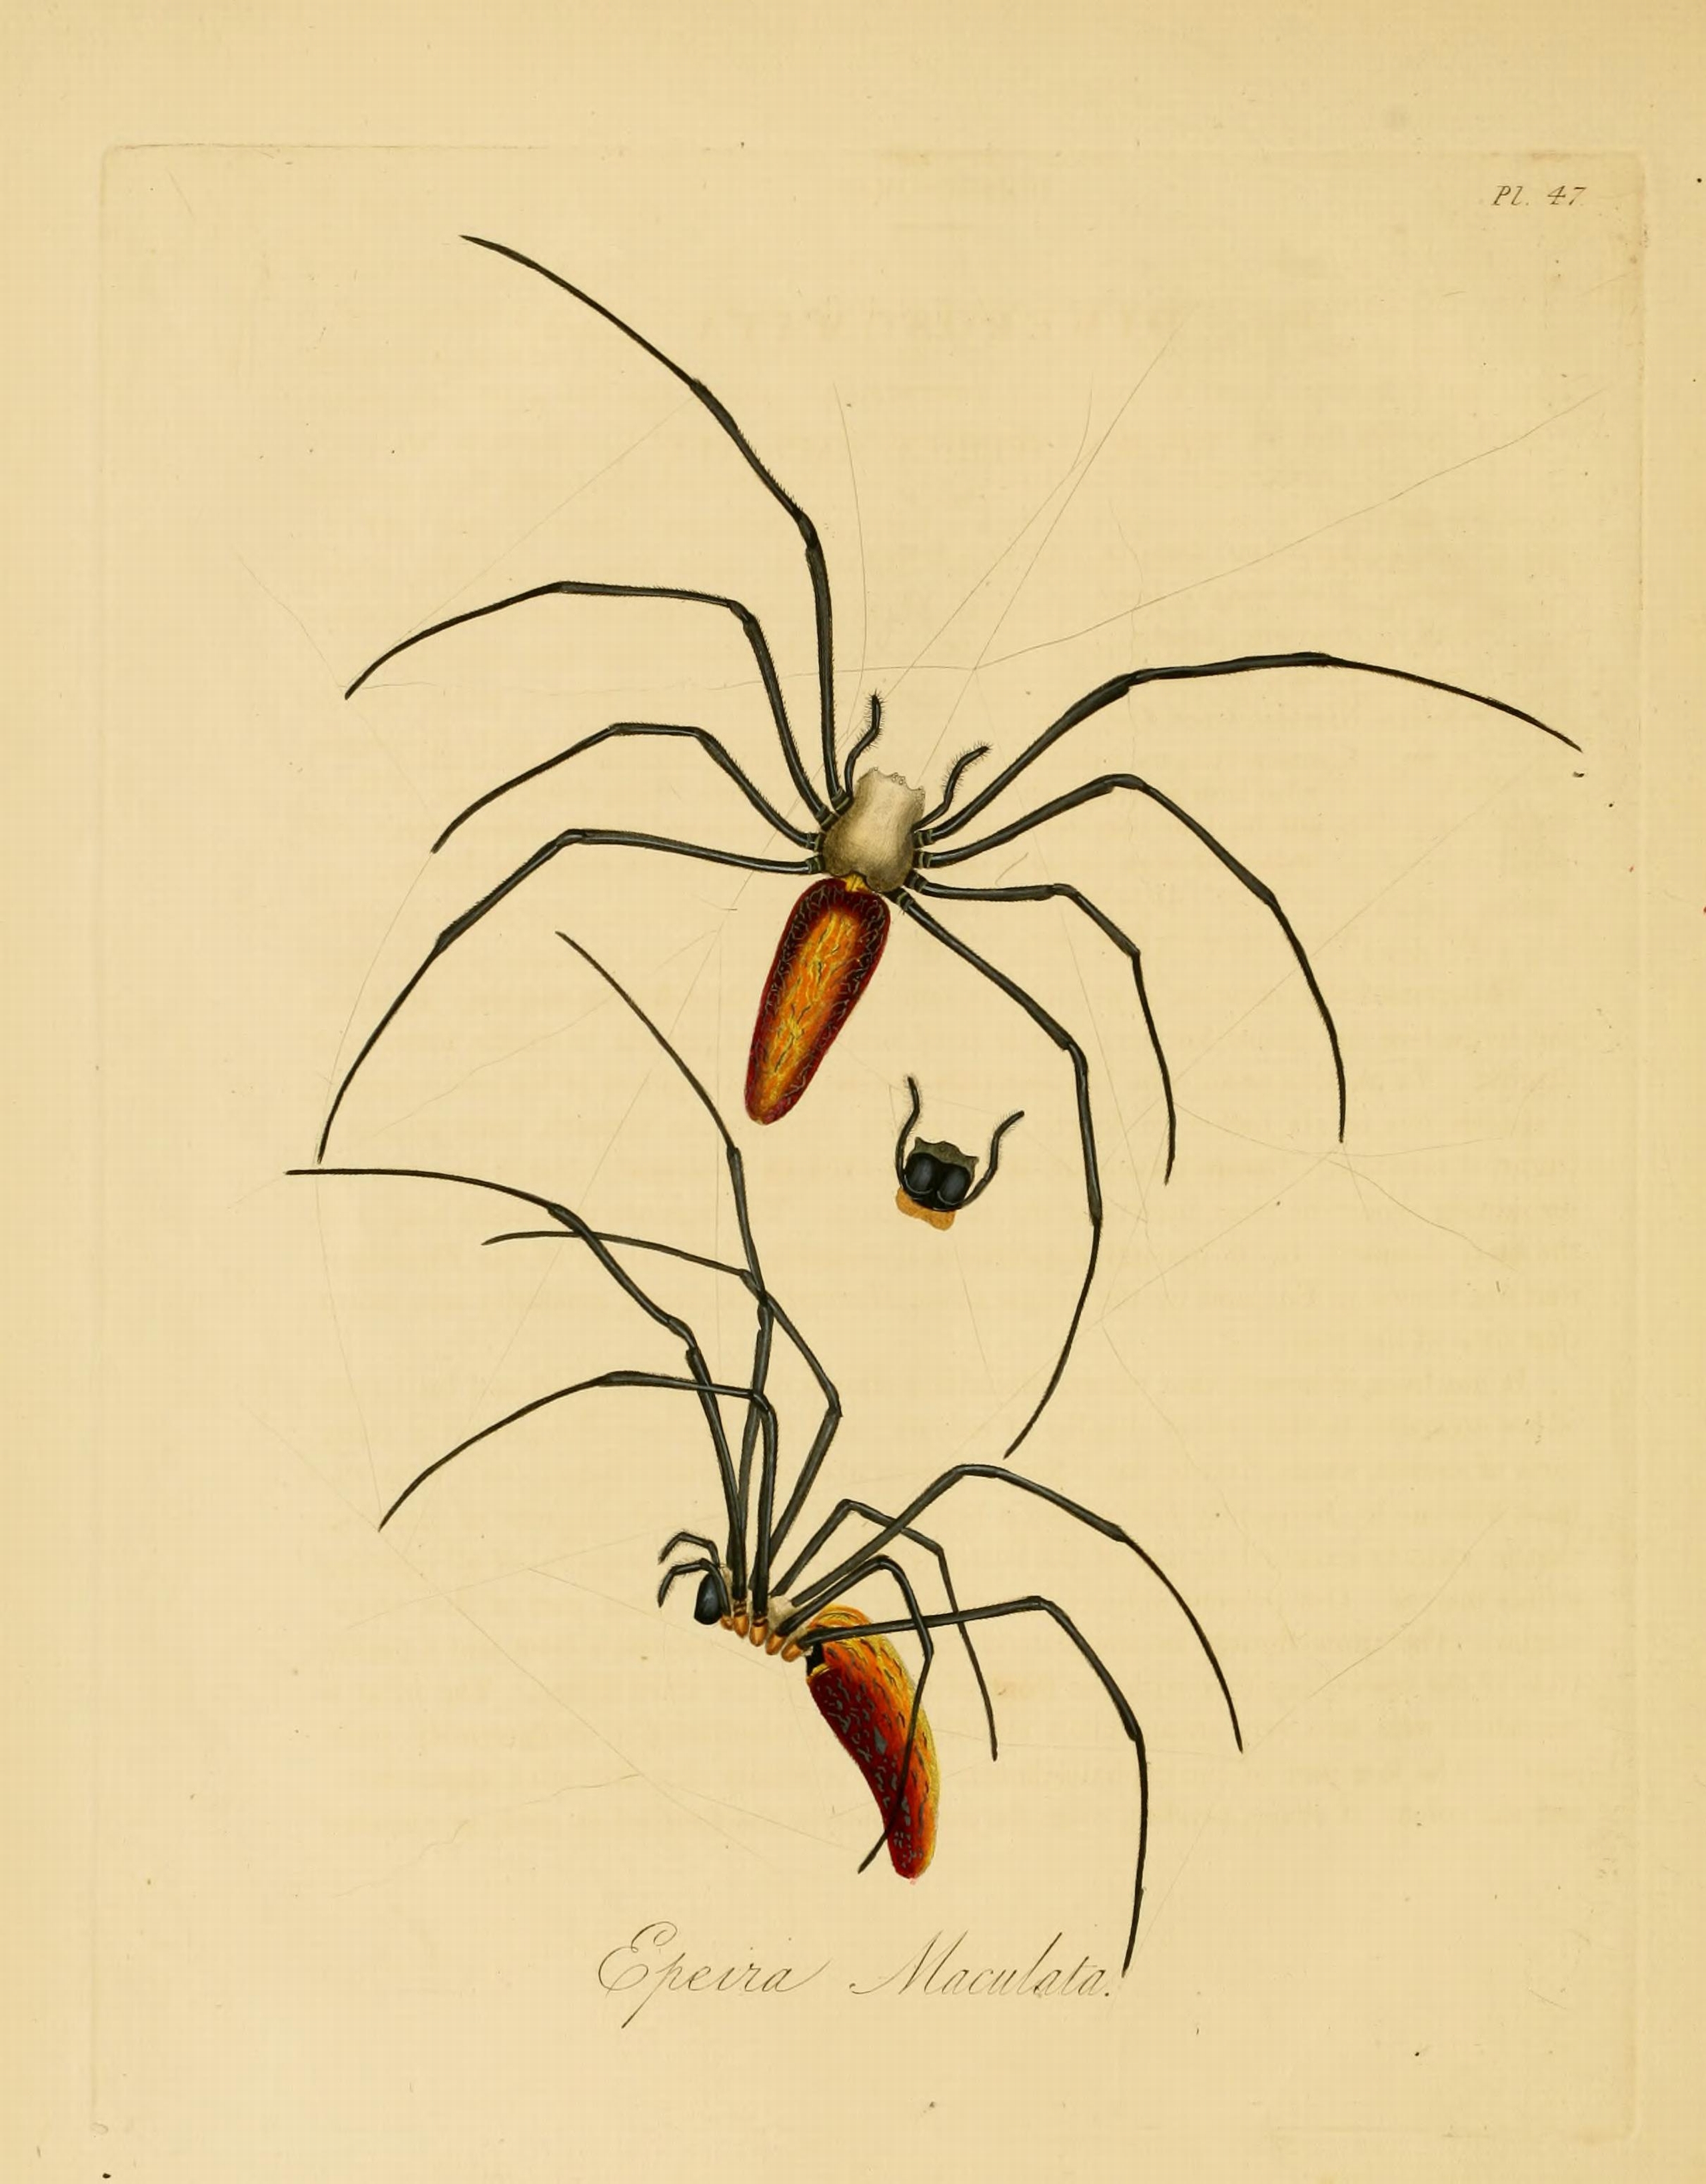 Donovan - Insects of China, 1838 - pl 47